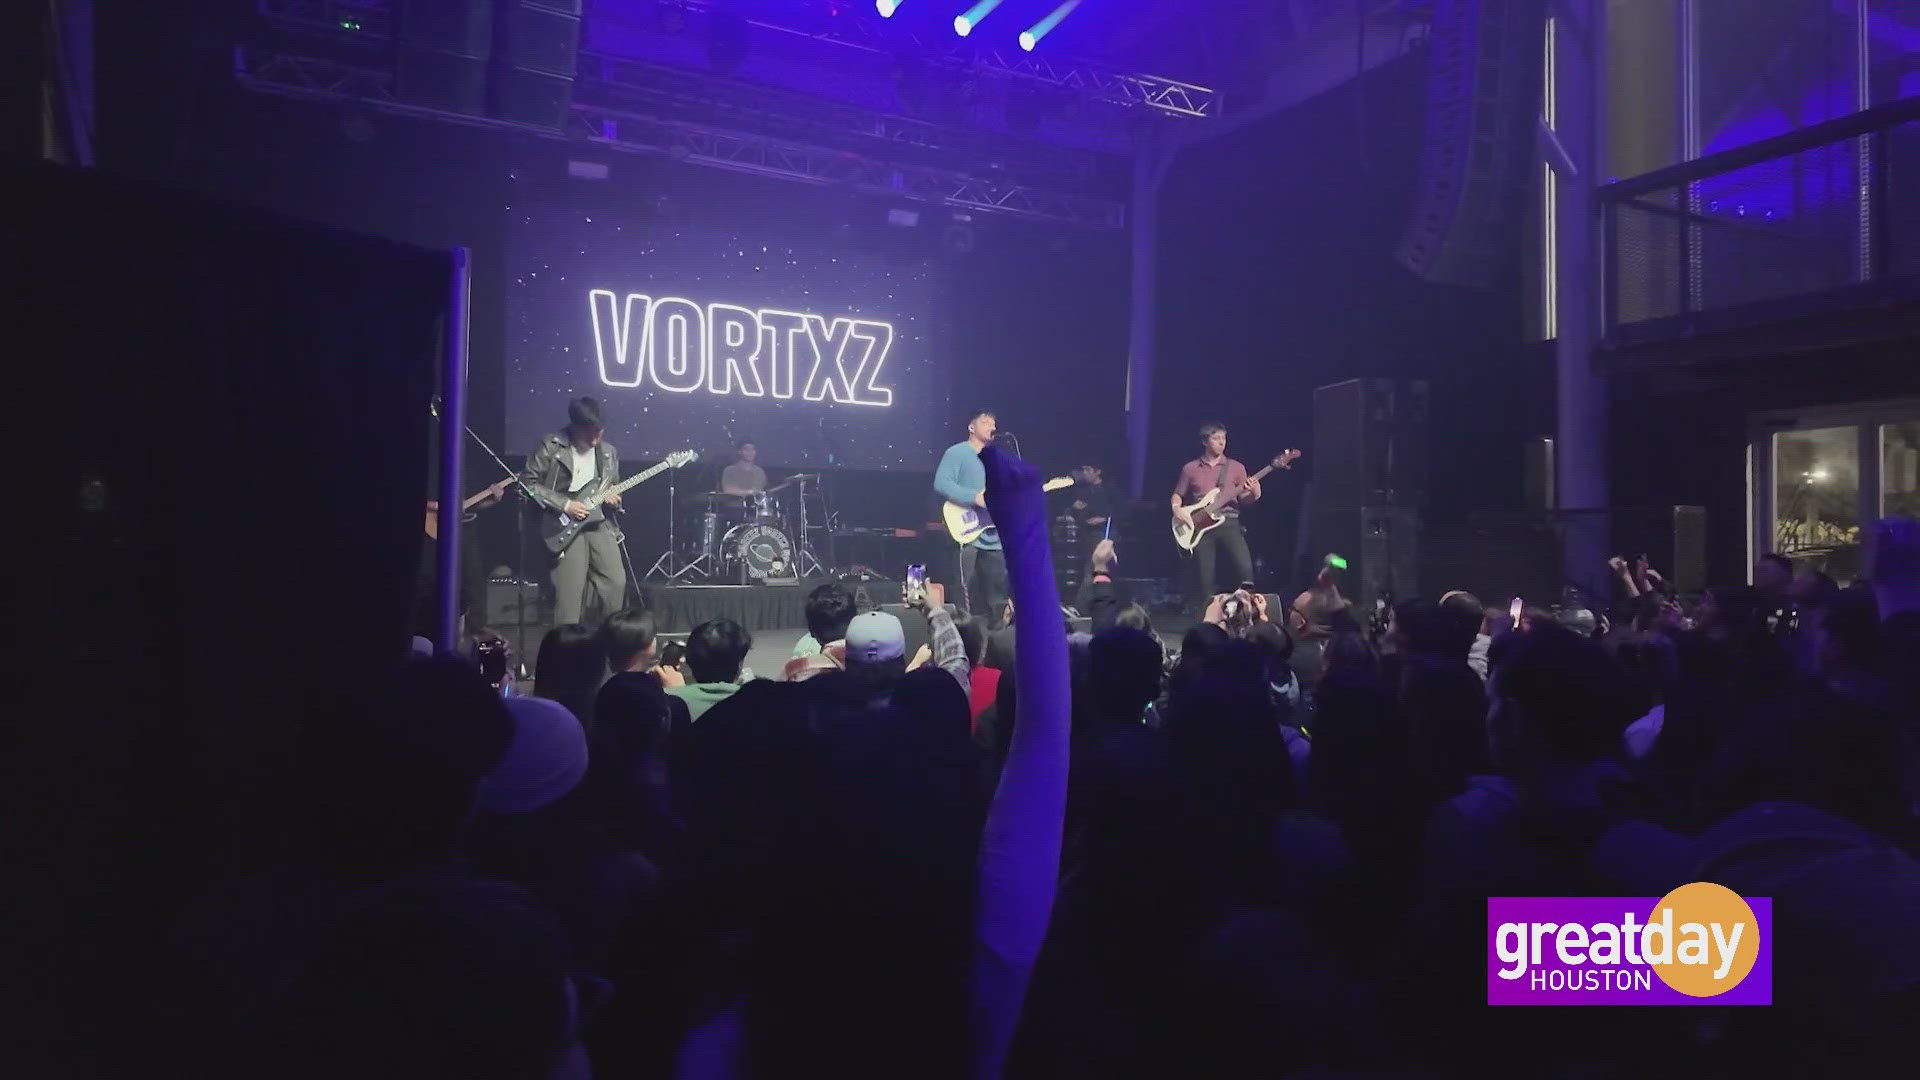 With more than 1.2 million likes on TikTok, Vortxz is making a splash on the music scene and selling out shows across the country.